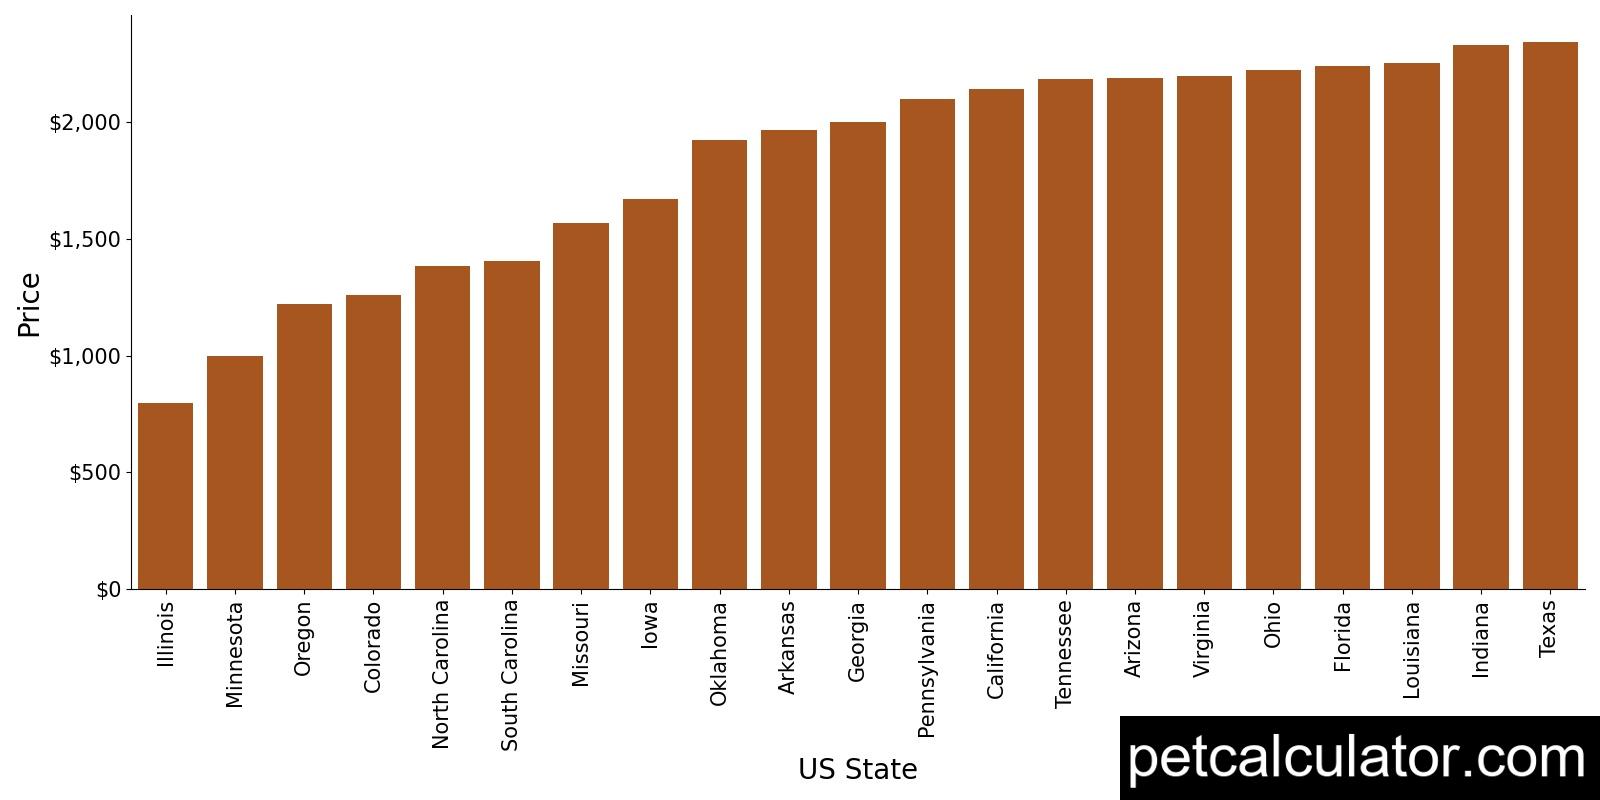 Price of Italian Greyhound by US State 